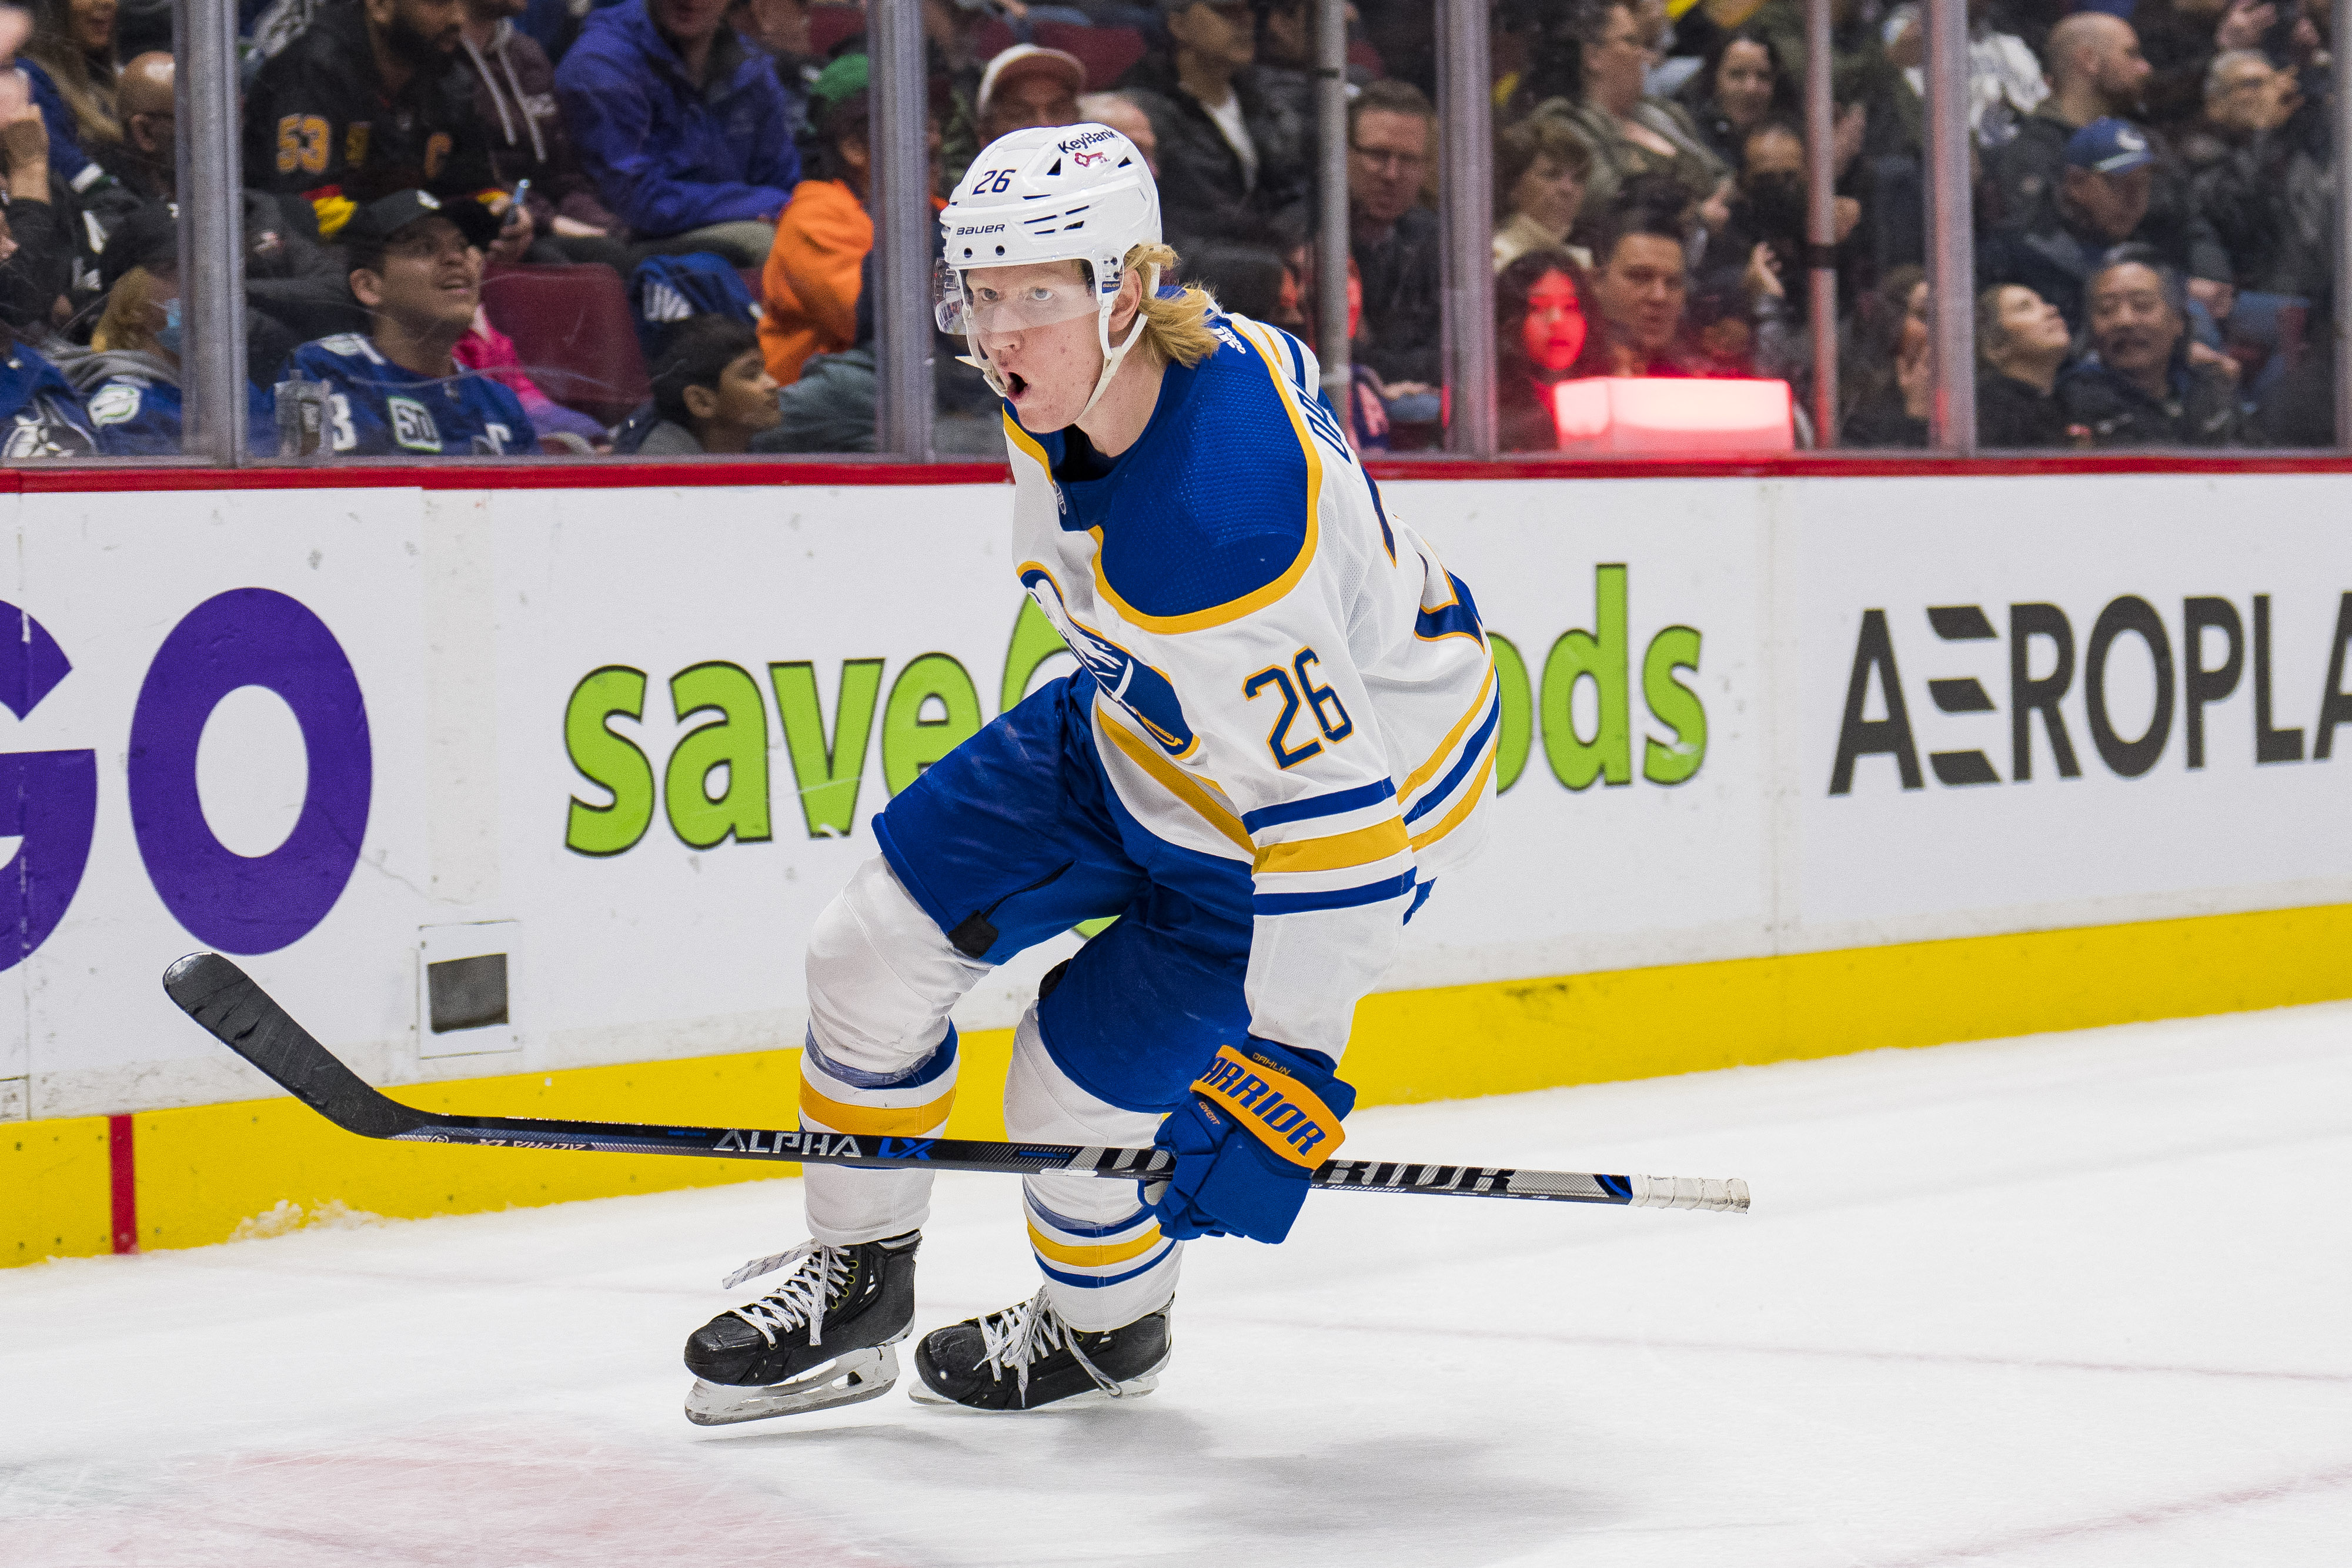 Brilliant outing by Rasmus Dahlin leads Sabres past Wild in OT